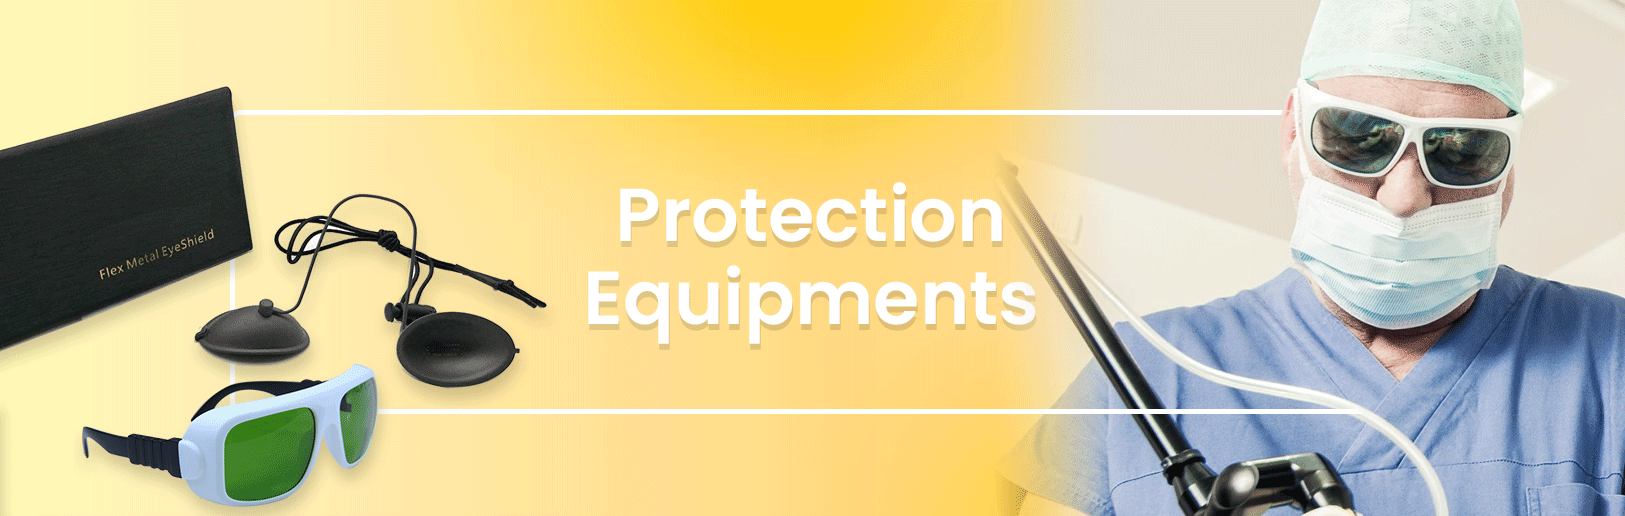 Laser Protection Equipments﻿